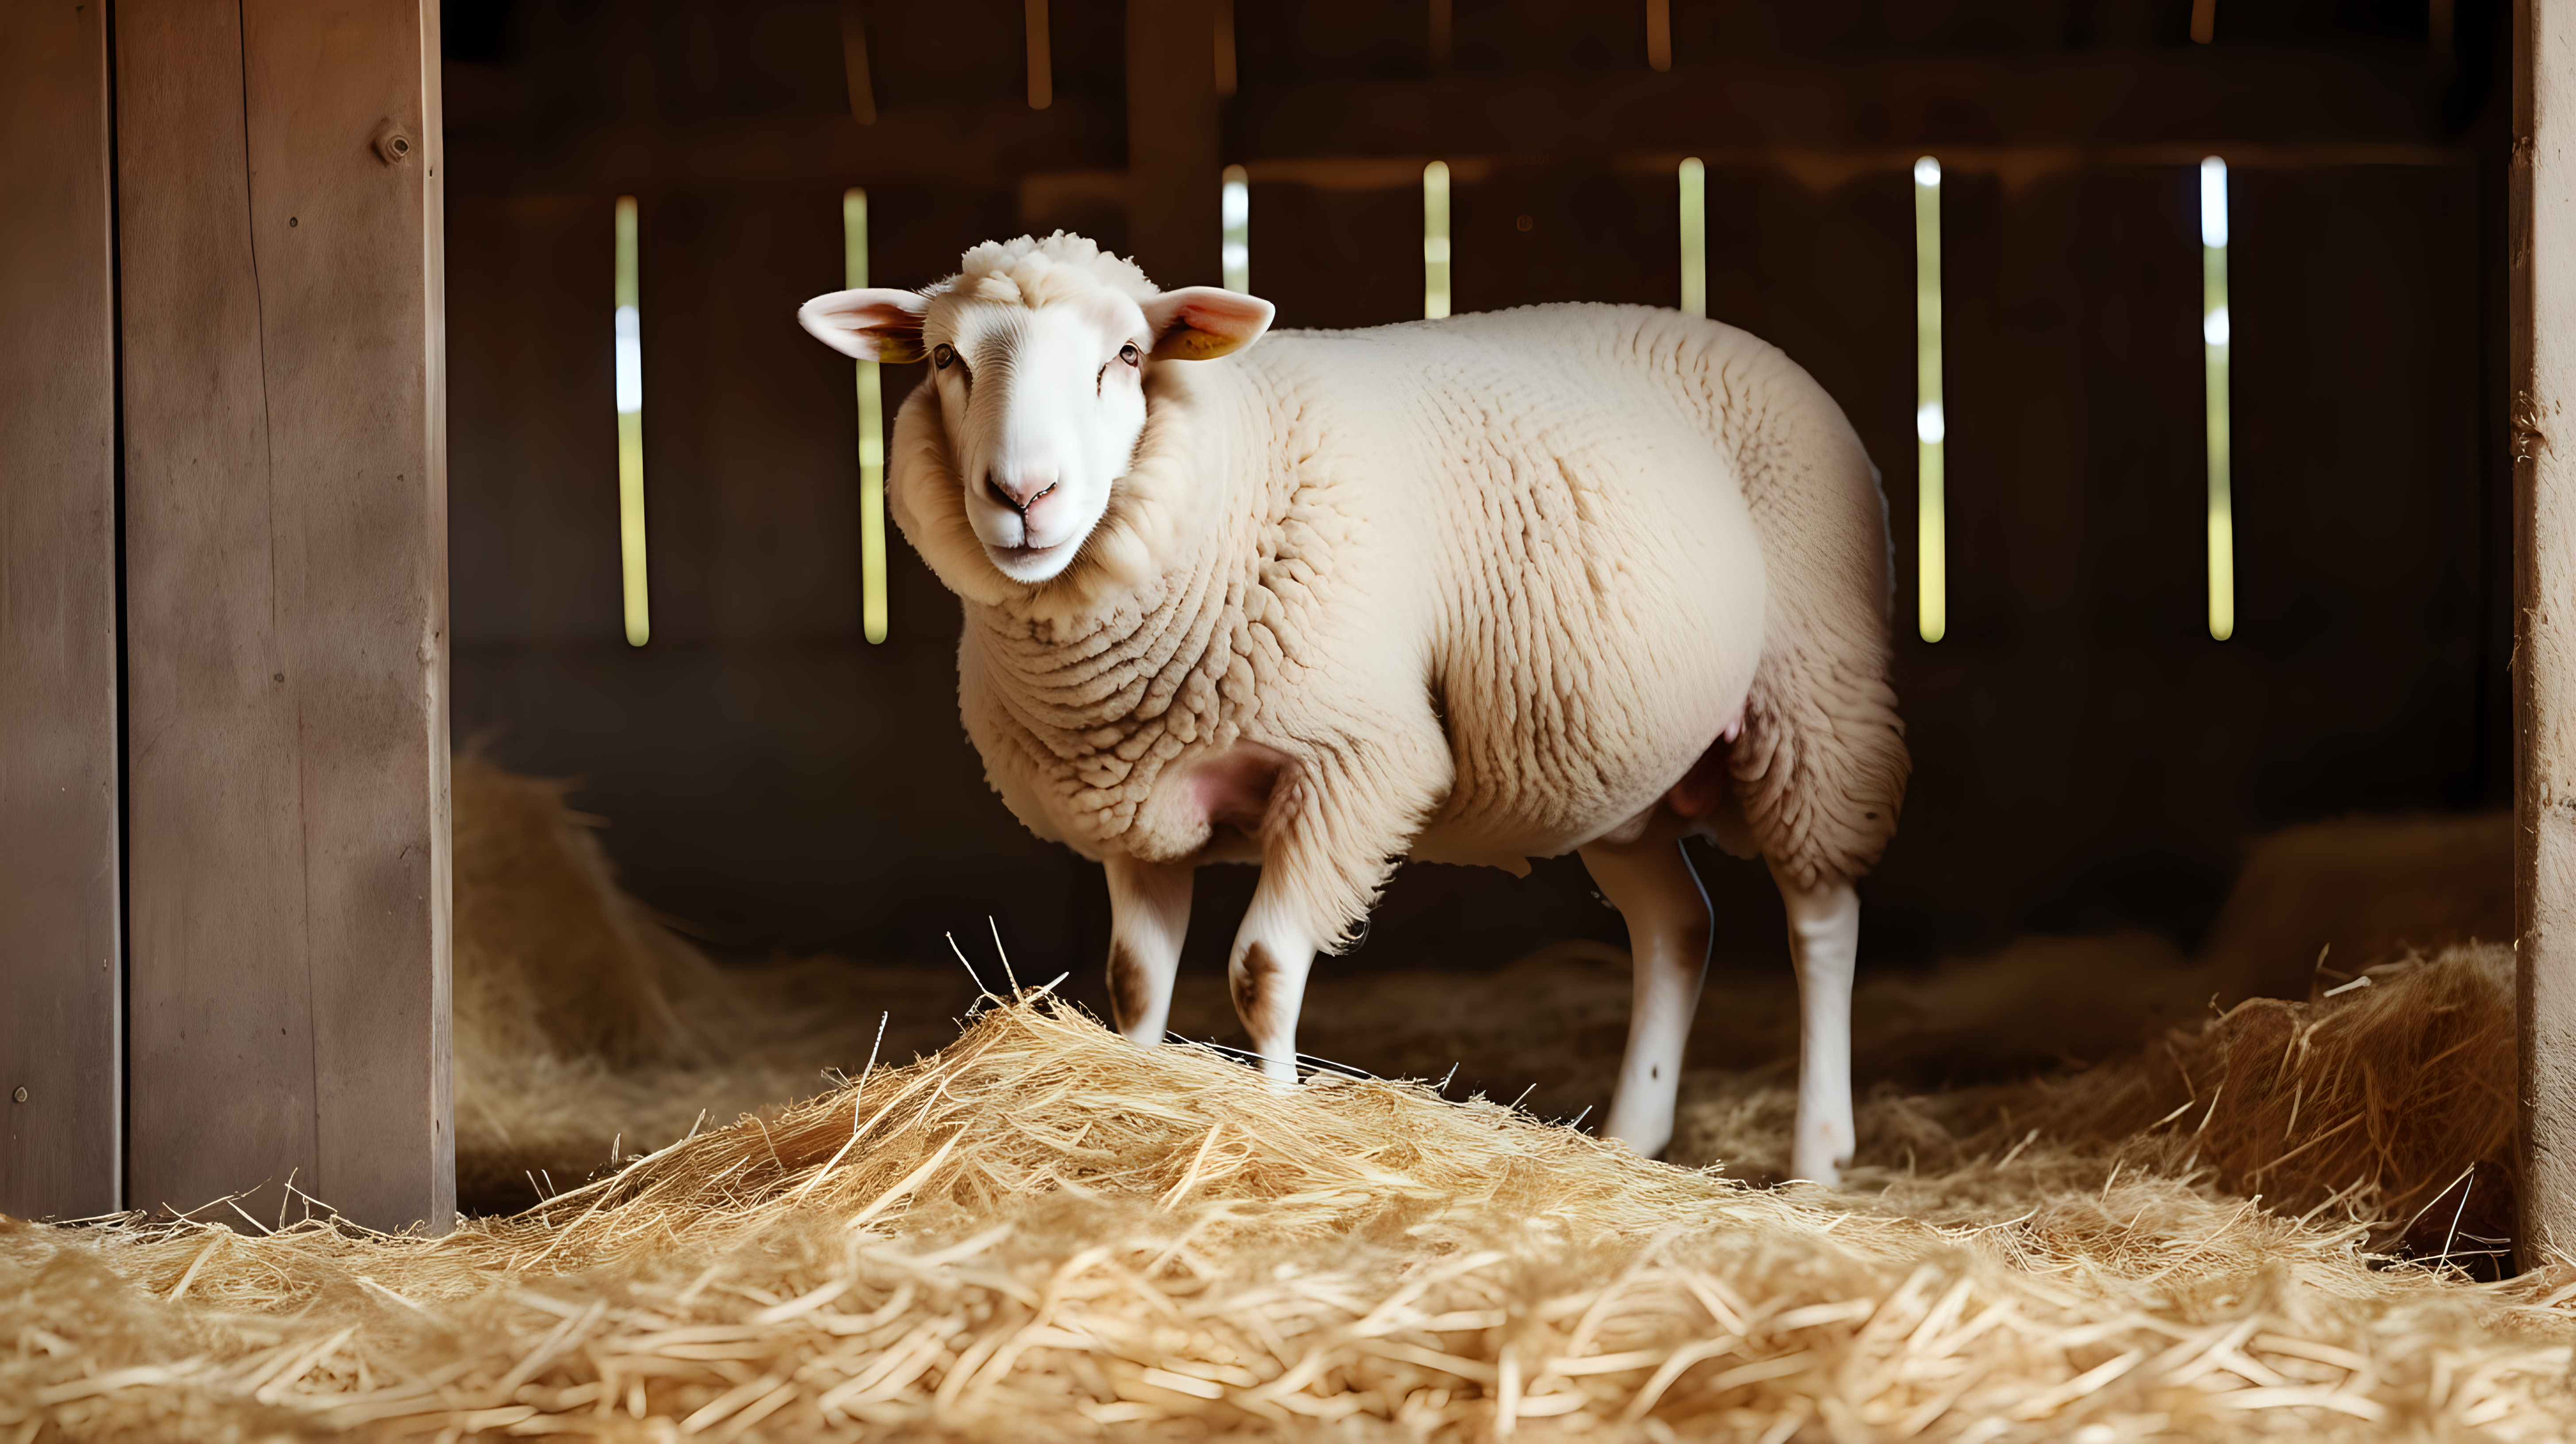 sheep eating hay in stable, farm barn, isolated on background, photo shoot